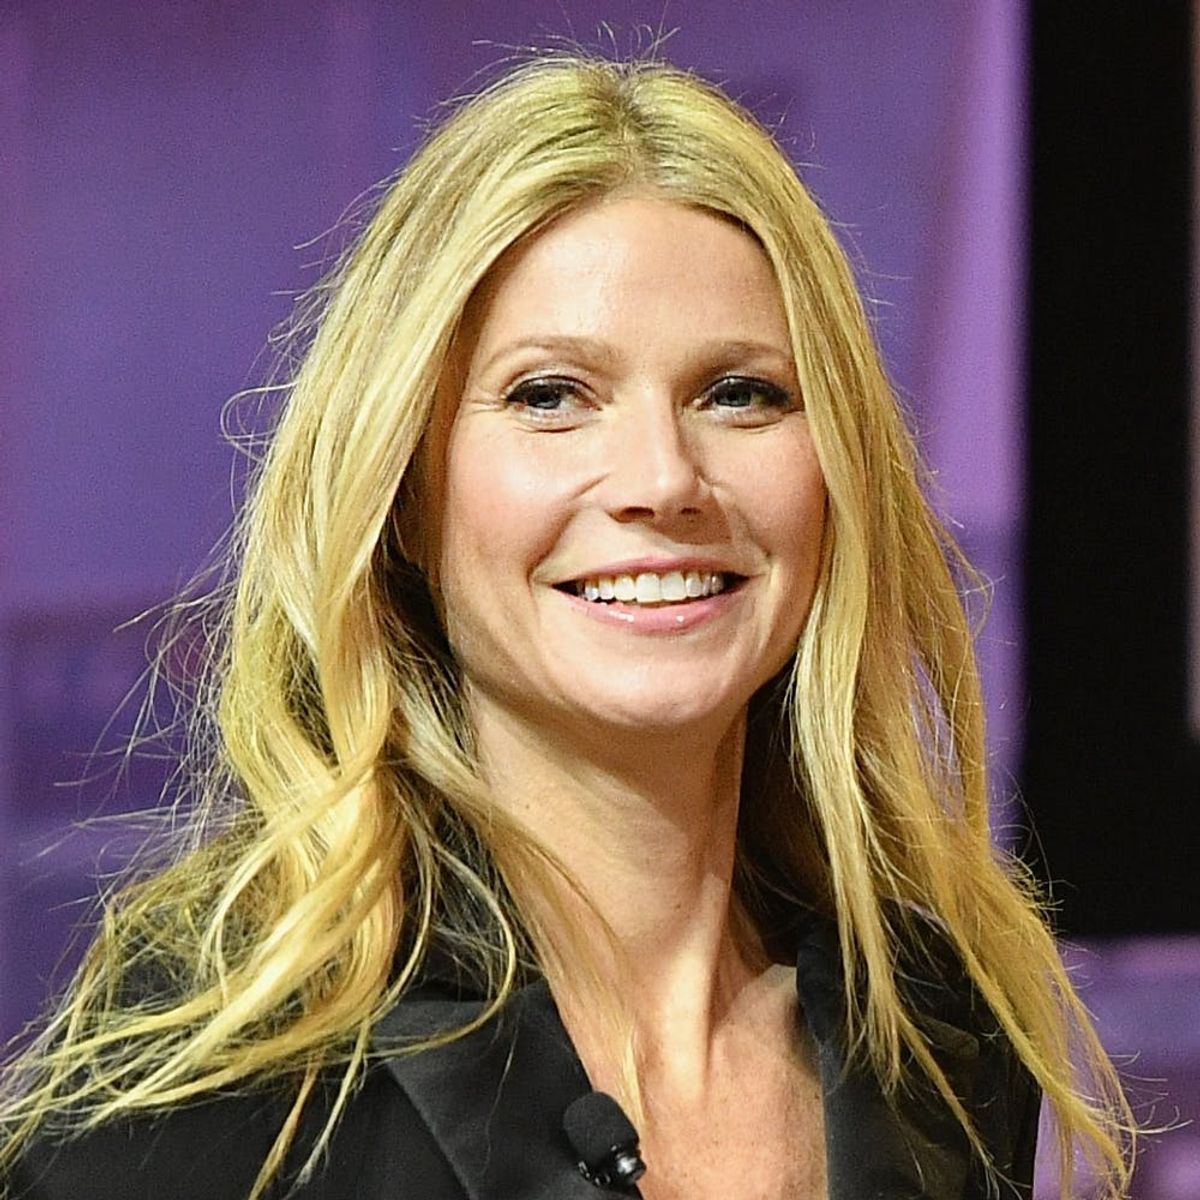 Engagement Rumors Are Buzzing Around Gwyneth Paltrow